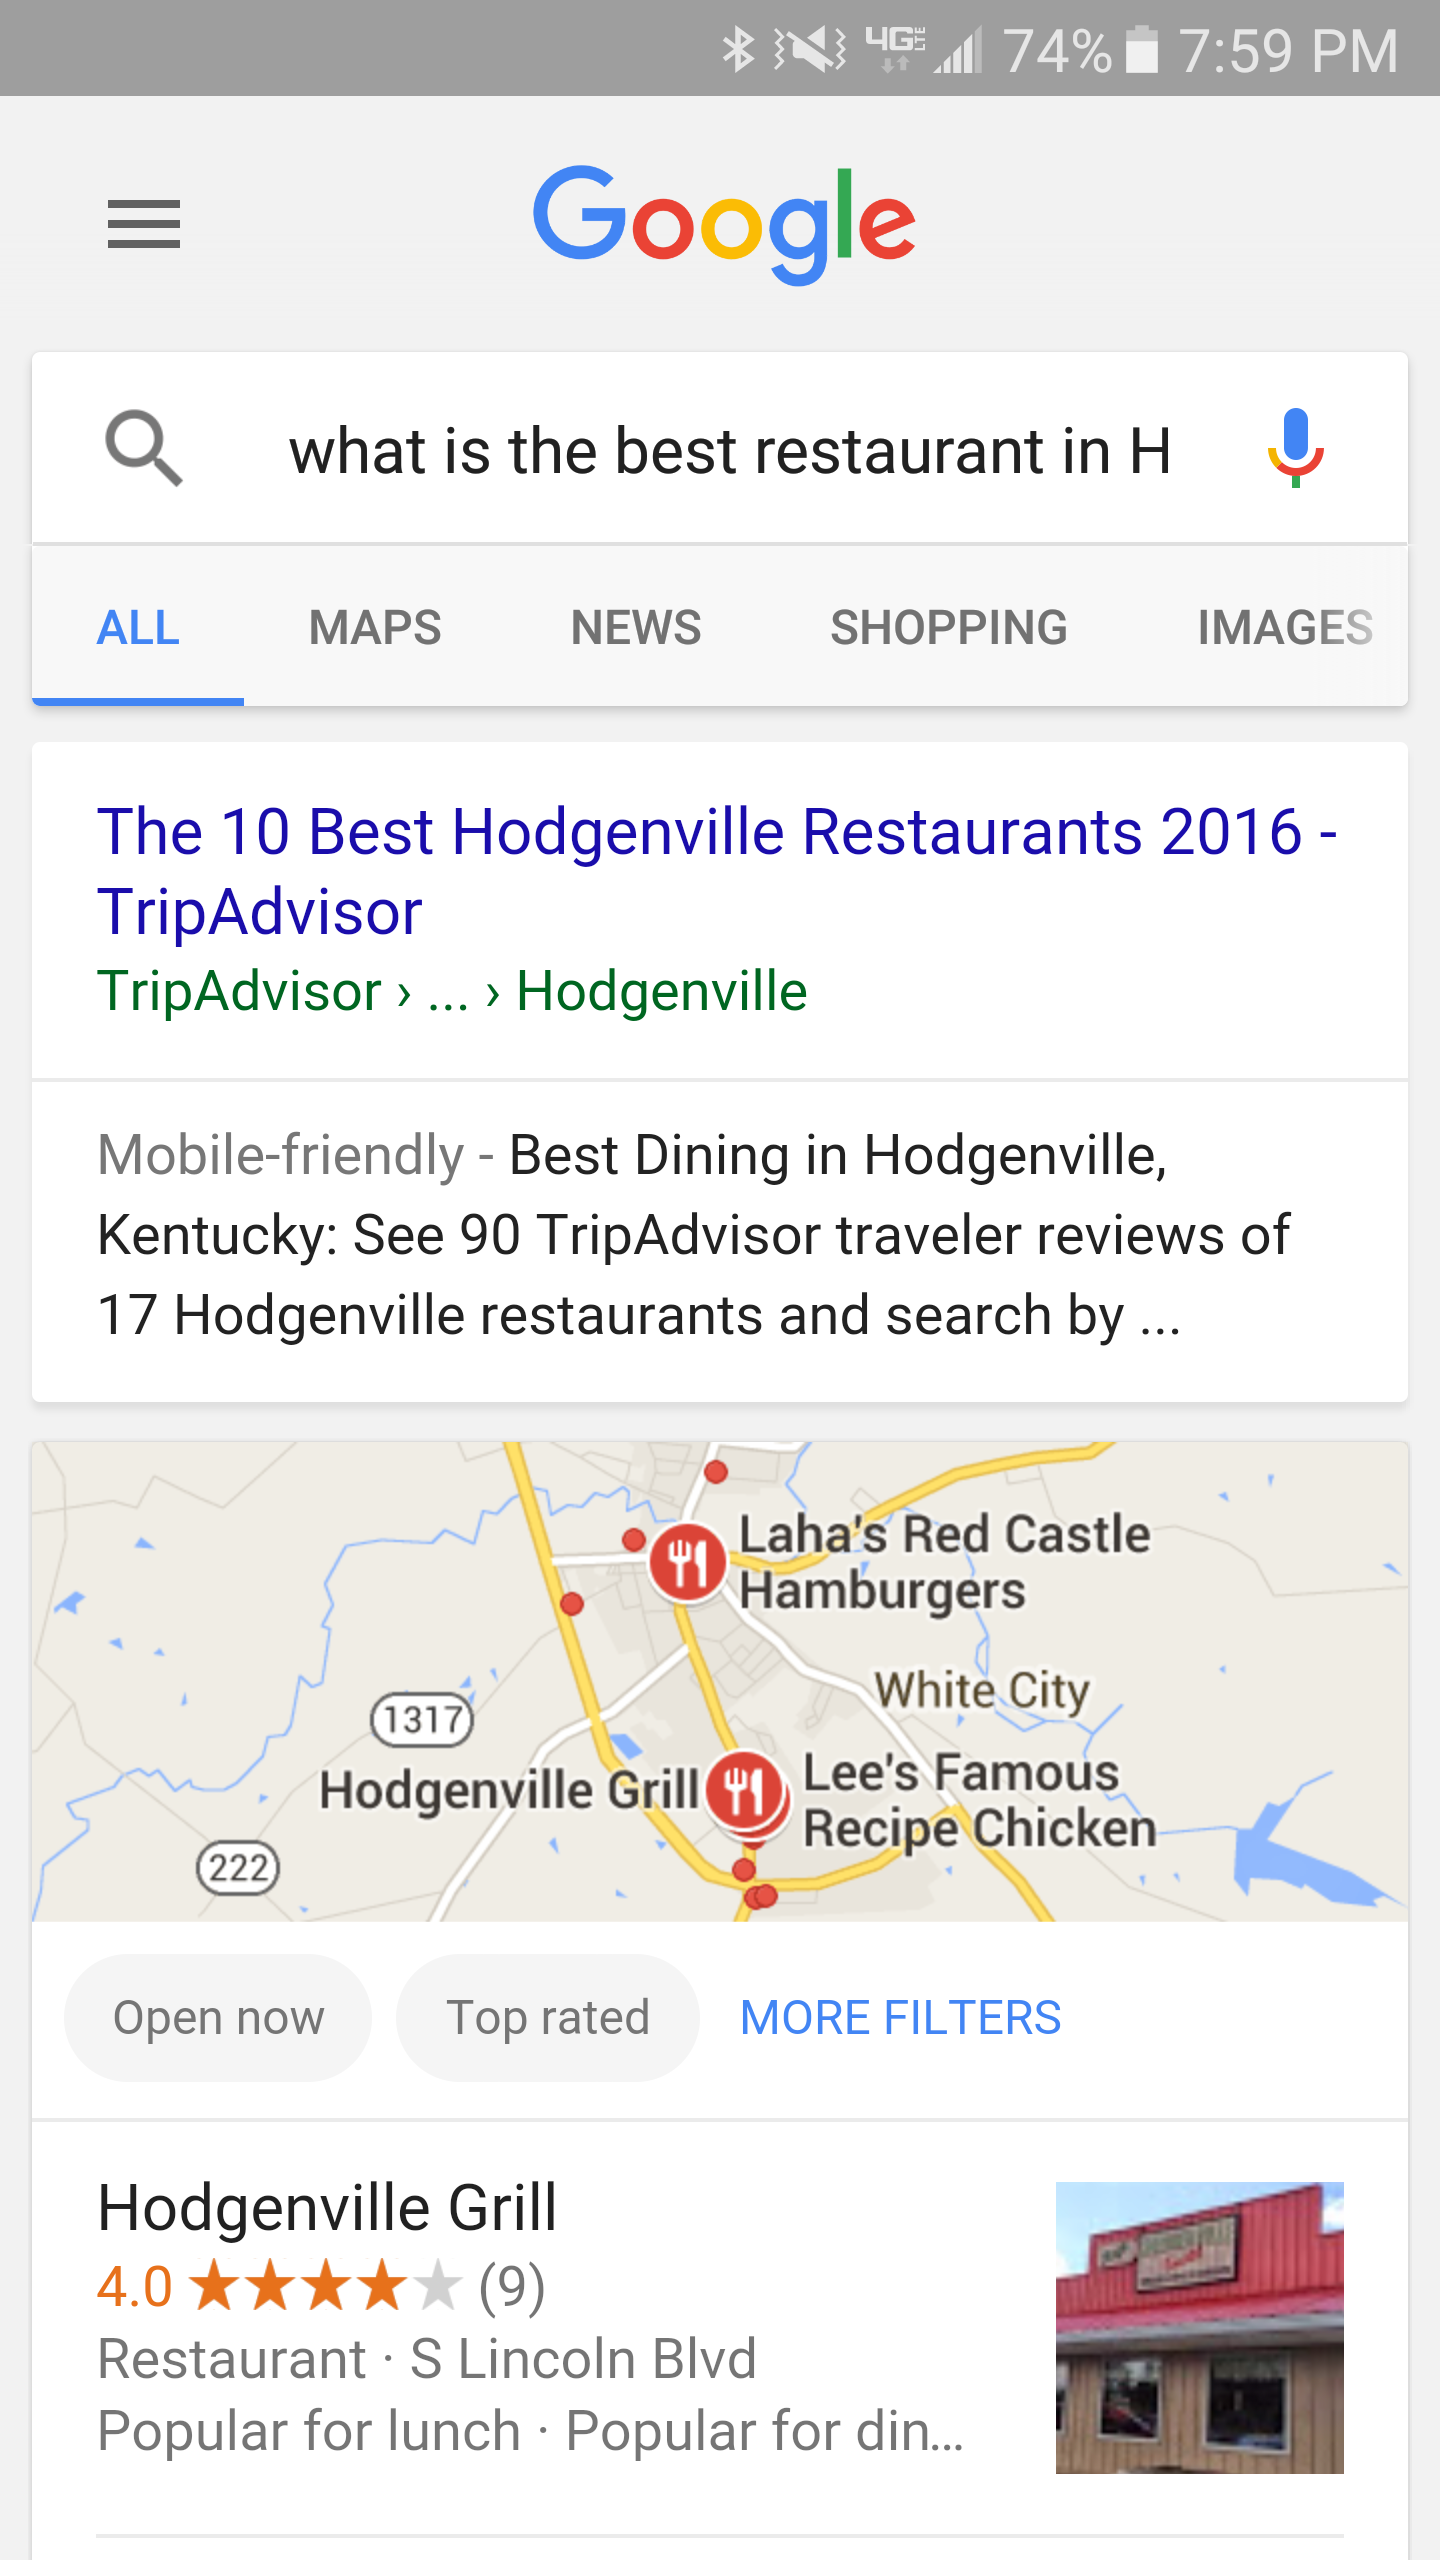 Google showing the best restaurants in the town Abraham Lincoln was born